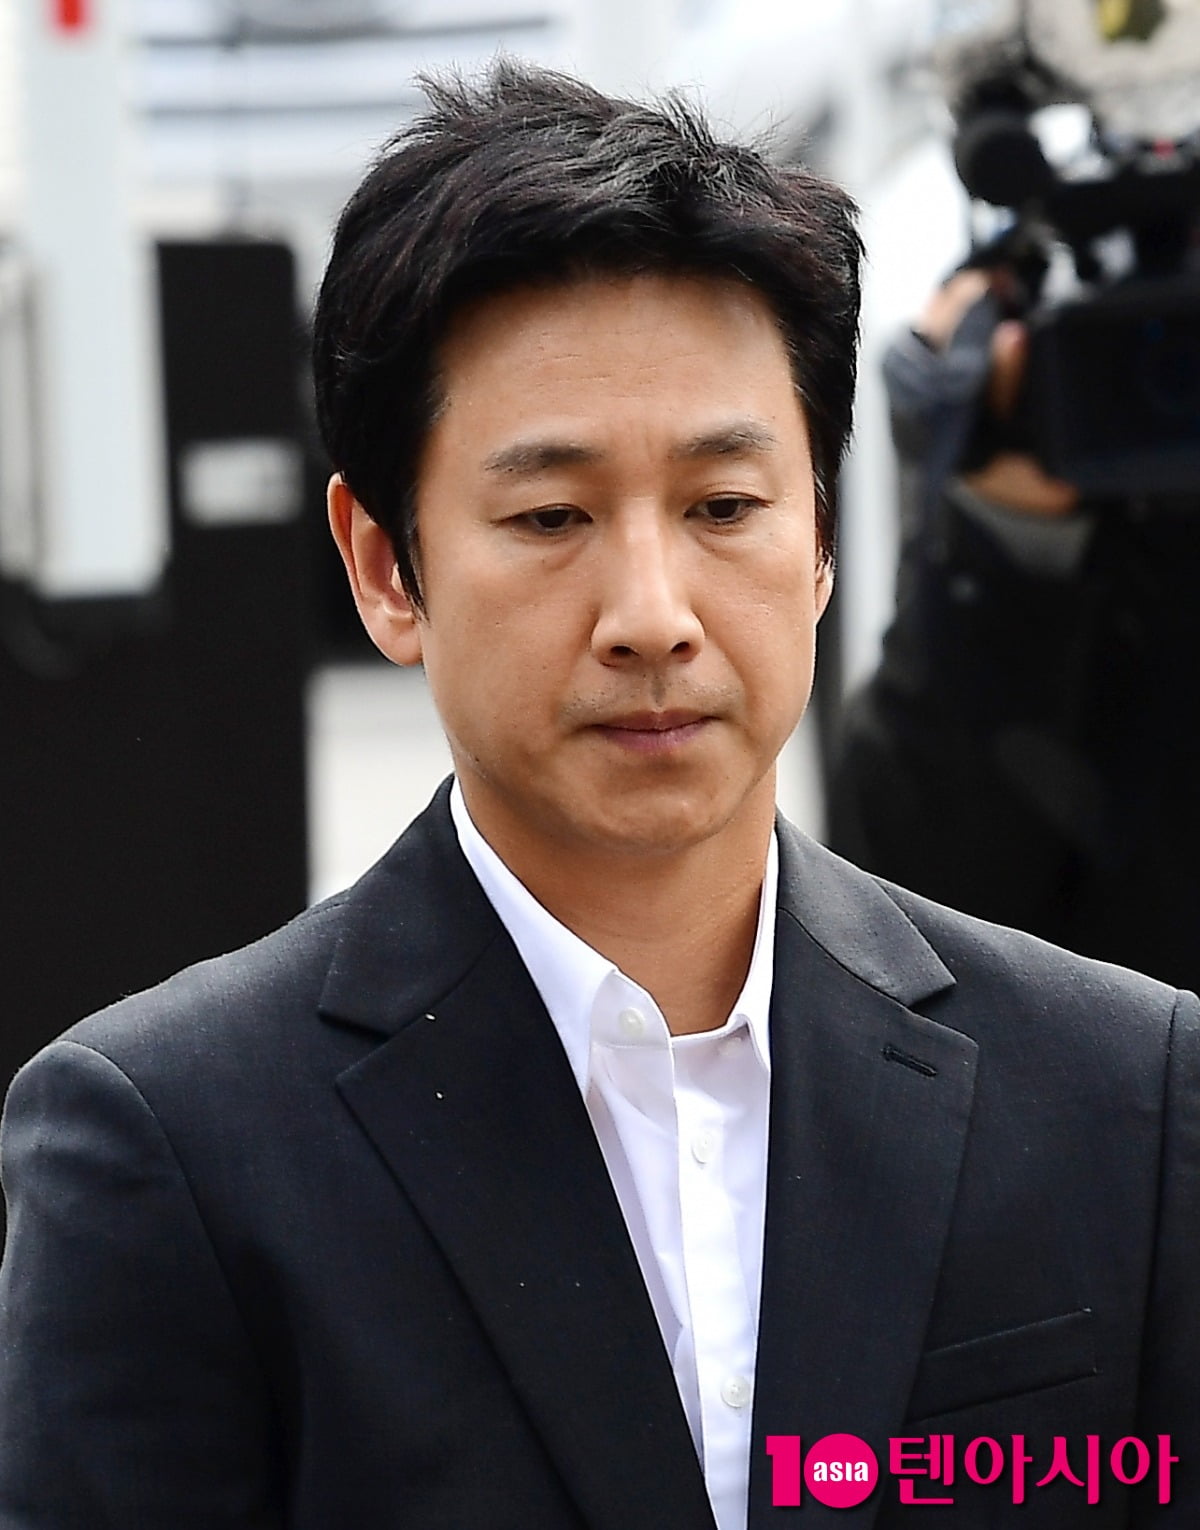 “I received insomnia medication from Mr. A” Lee Seon-gyun, ‘intentional’ to suppress investigation… Mobile phone forensics ‘attention’